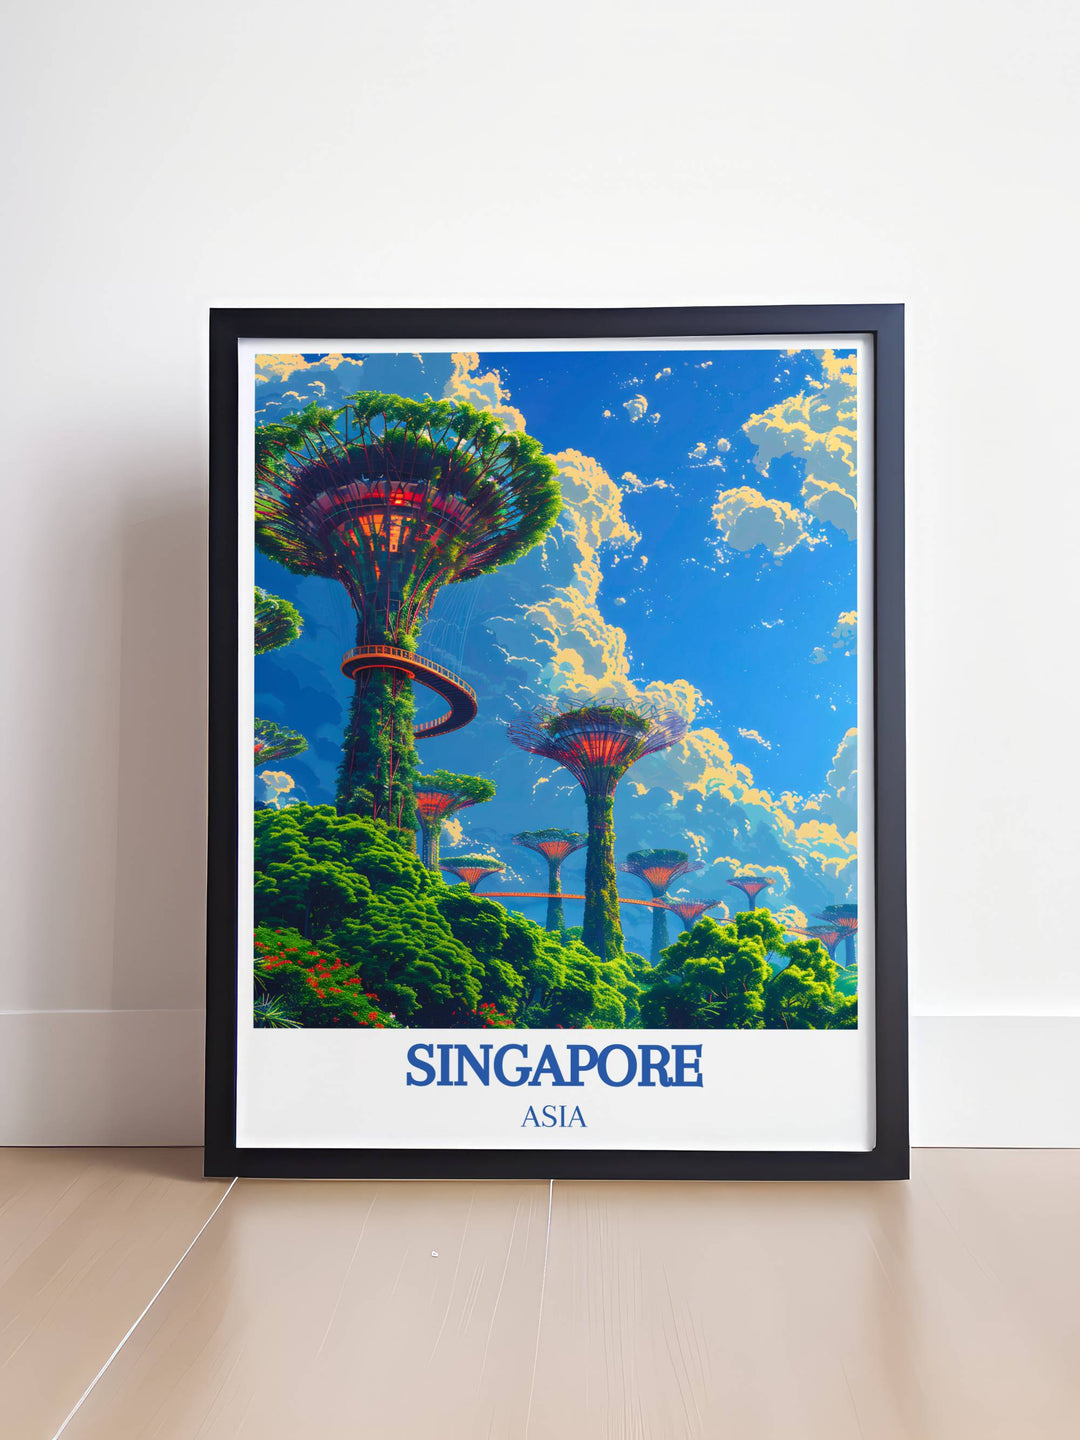 Detailed Singapore poster showcasing the iconic Gardens by the Bay, suitable for office decor or as a thoughtful Singapore gift for travelers and art lovers.